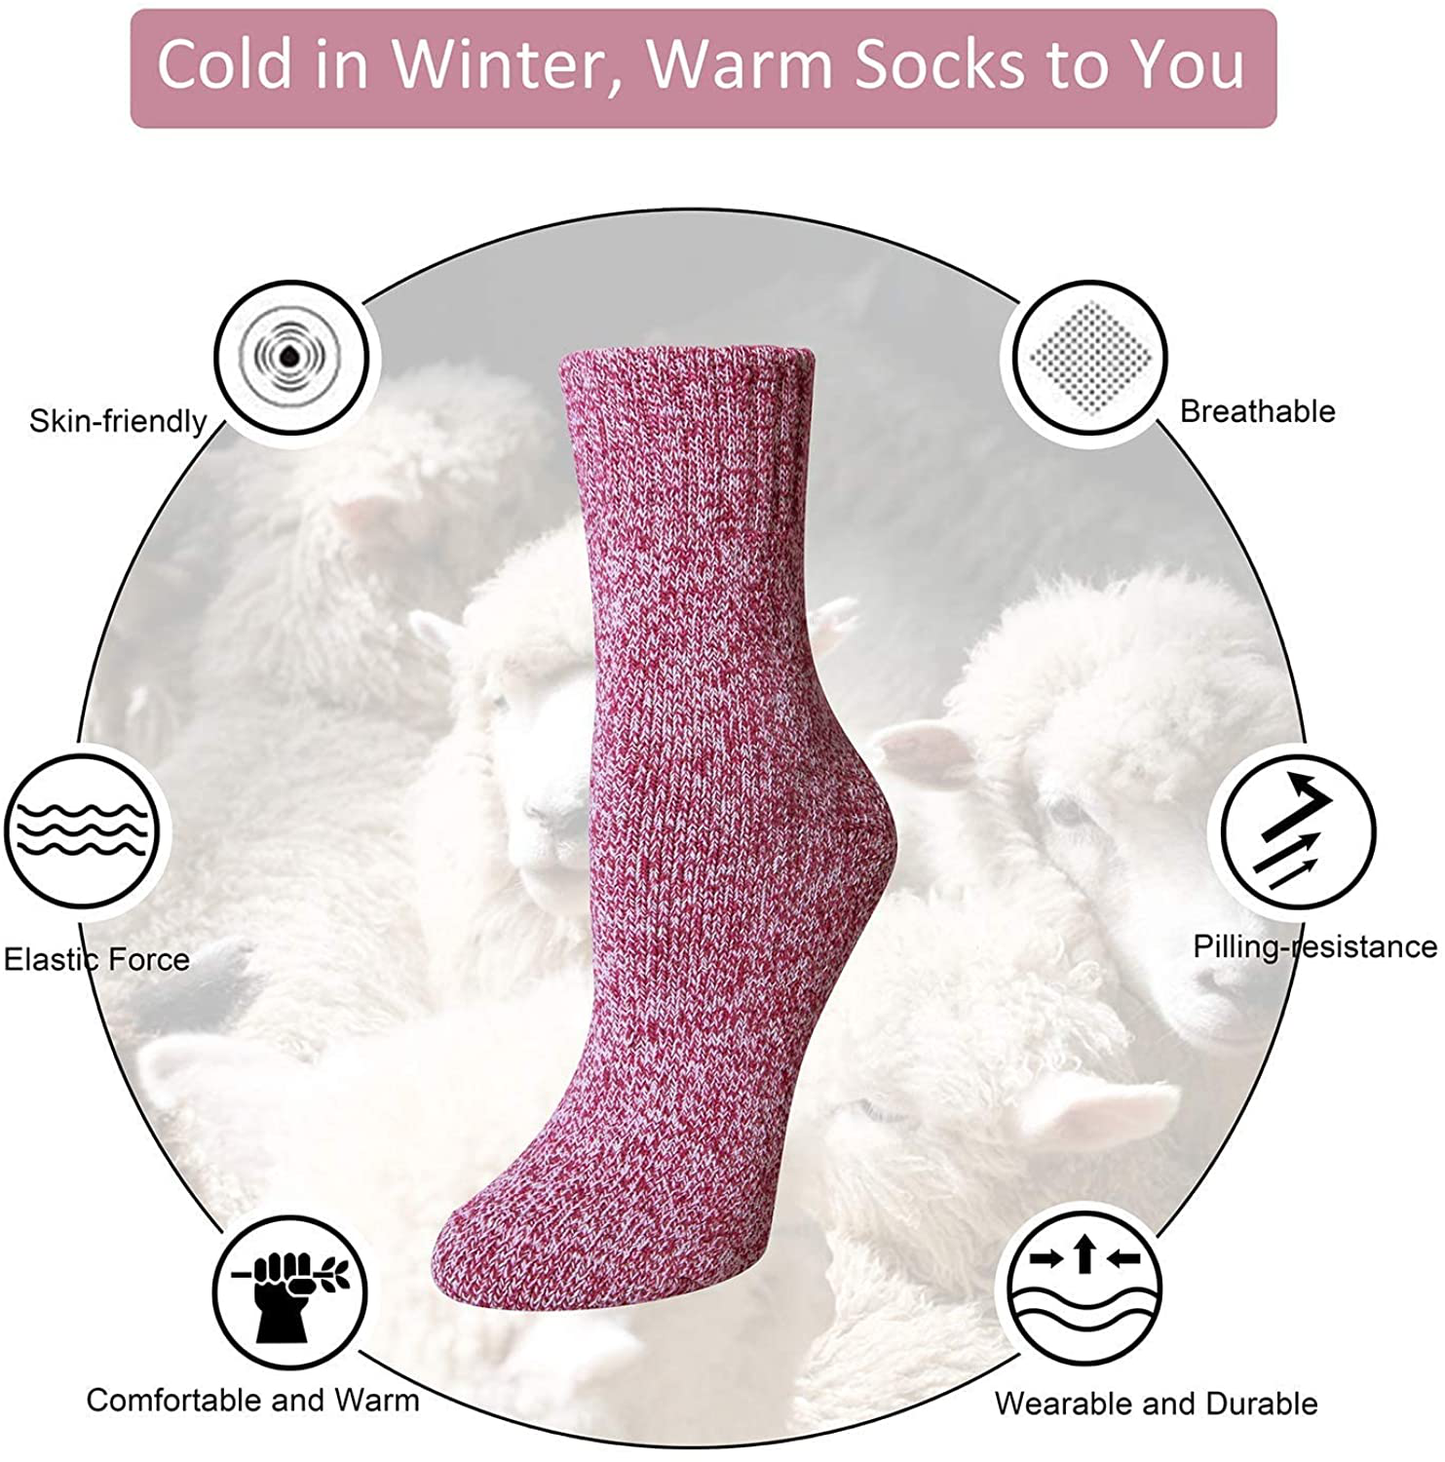 Womens Wool Socks, 5 Pairs Vintage Thick Knit Winter Warm Socks for Women Men Gifts